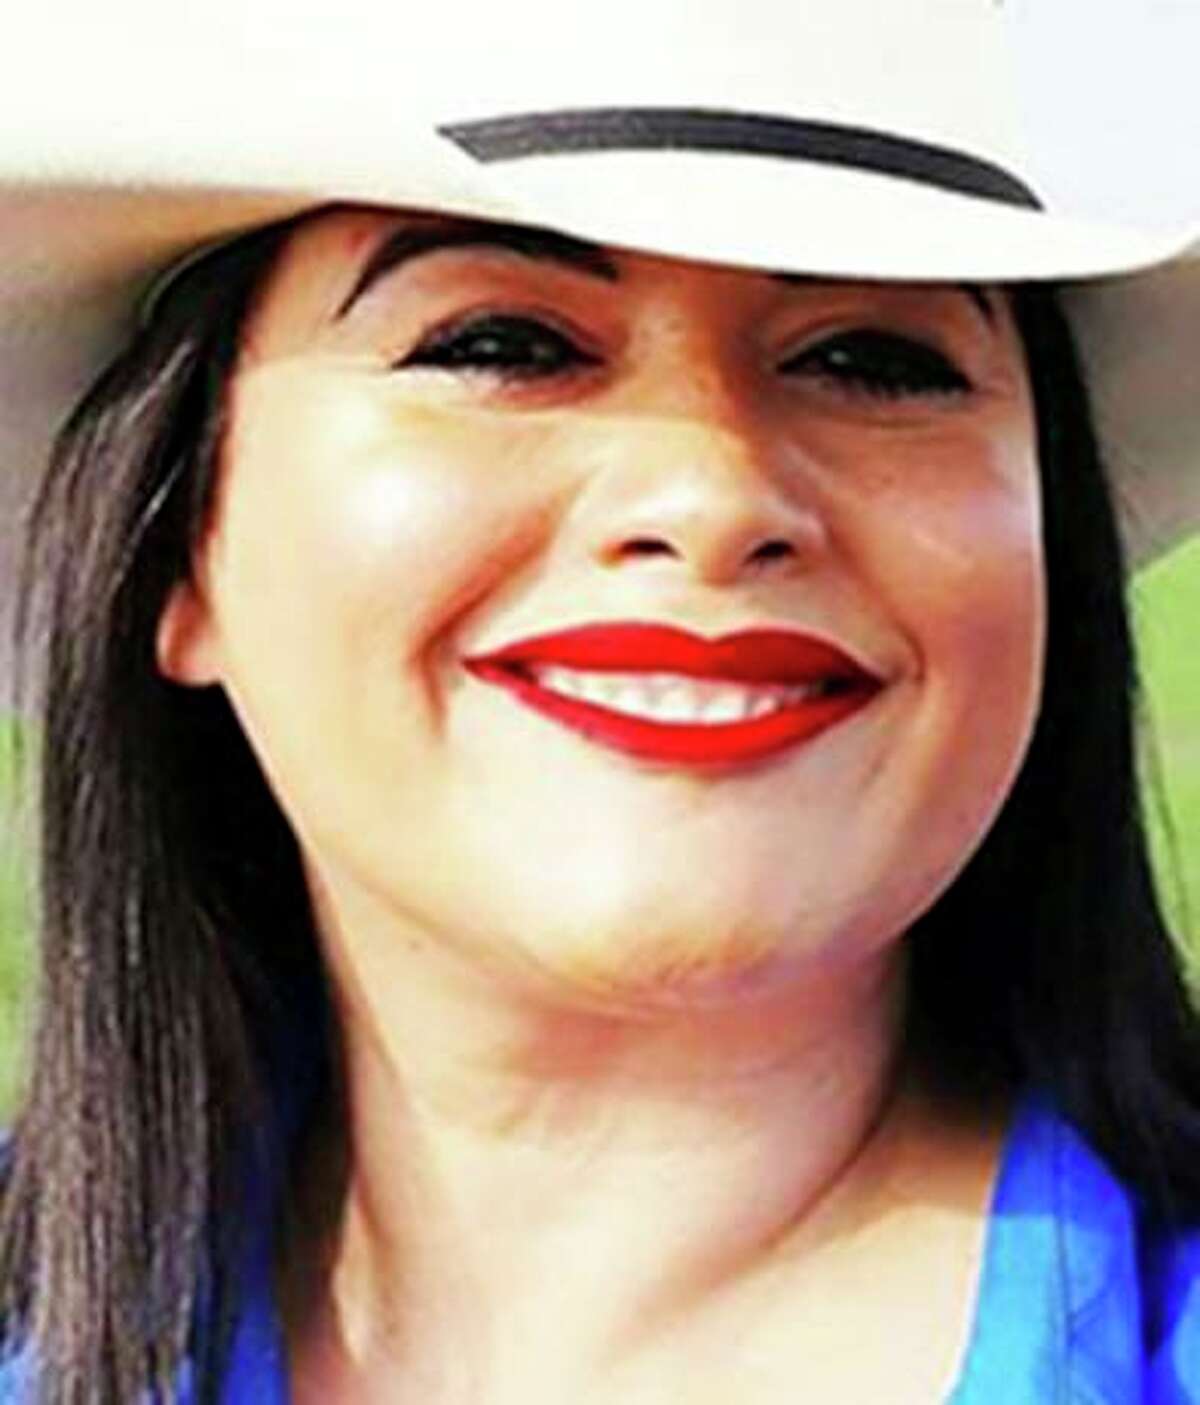 The Texas Republican Party announced Friday, Sept. 4, 2020, that it would not support Republican state Senate candidate Vanessa Tijerina after she was arrested and charged with driving under the influence with her children in the car in June.